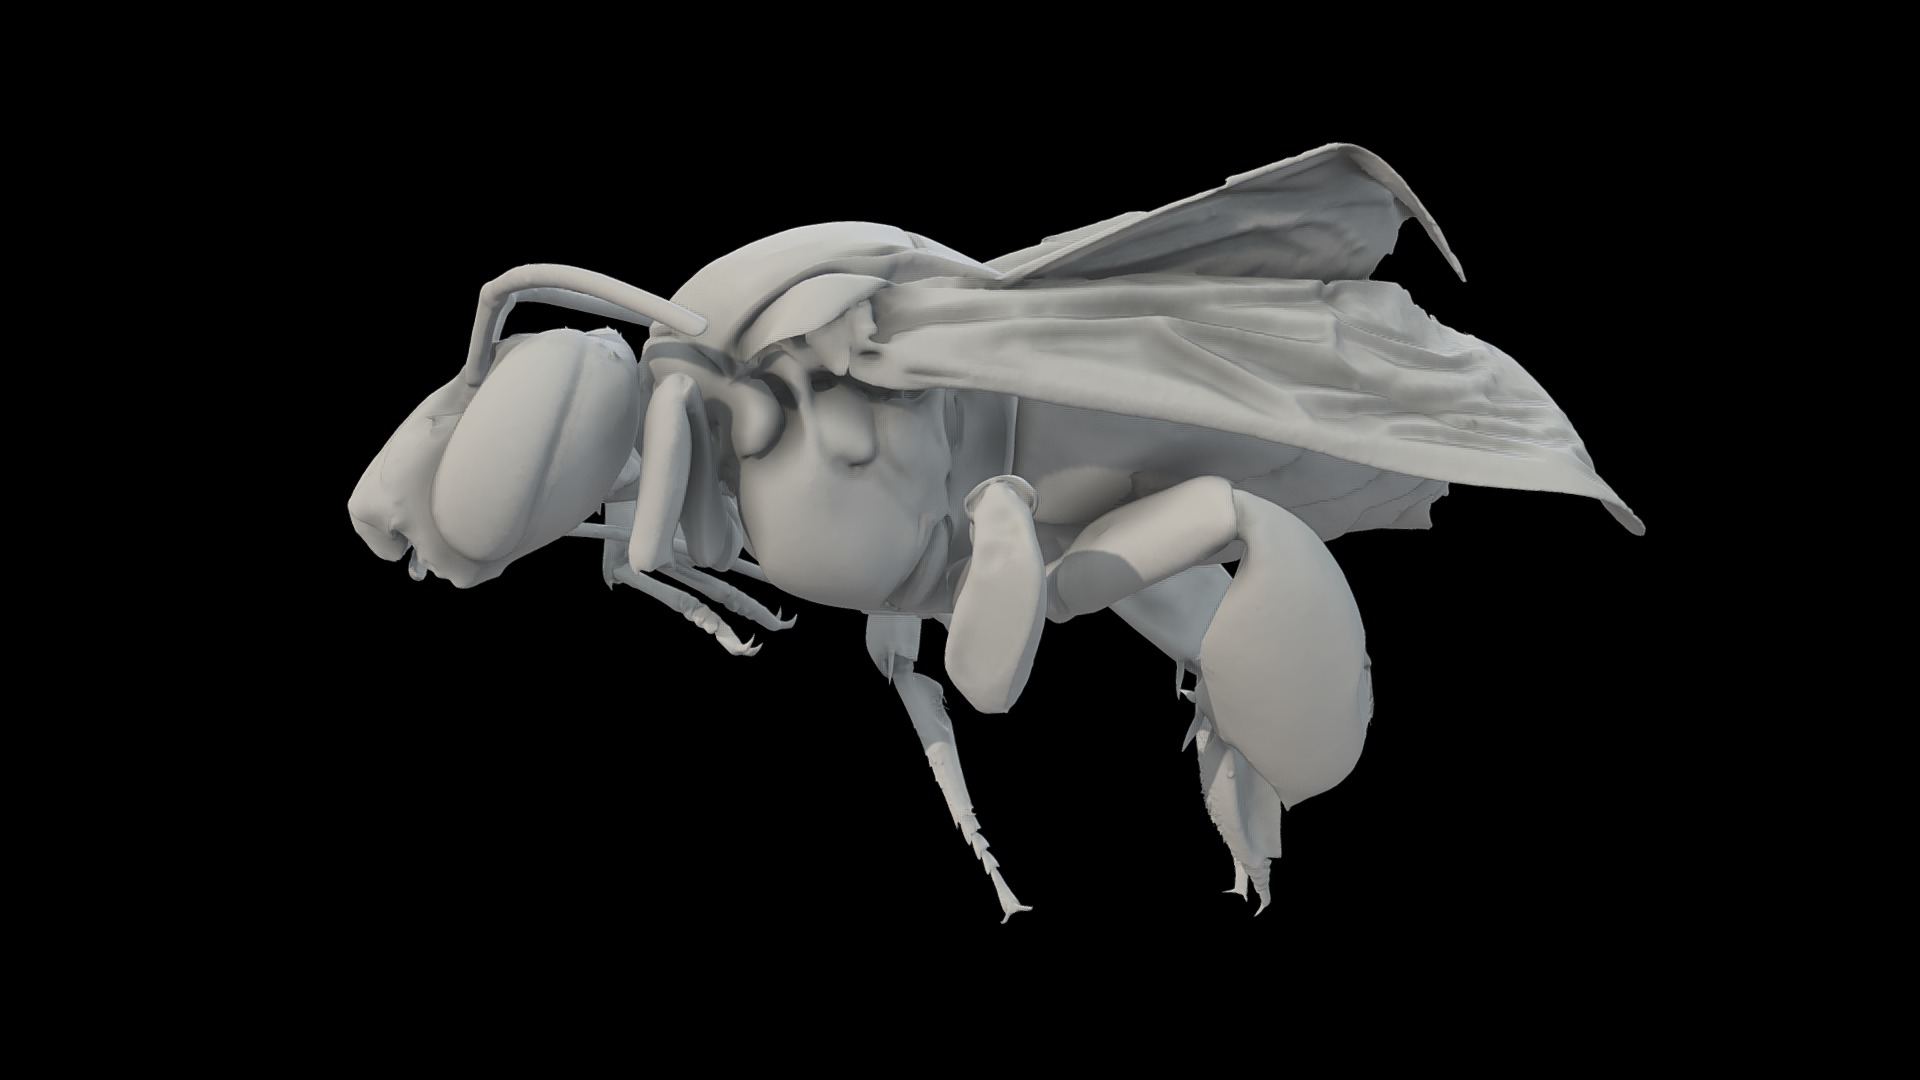 Taken from the Smithsonian X 3D scan of a Eulaema Meriana Bee, located here: https://3d.si.edu/explorer?s=hb3SeT - Eulaema Meriana Bee-scale Mm-1M Triangle - 3D model by ccoltharp 3d model